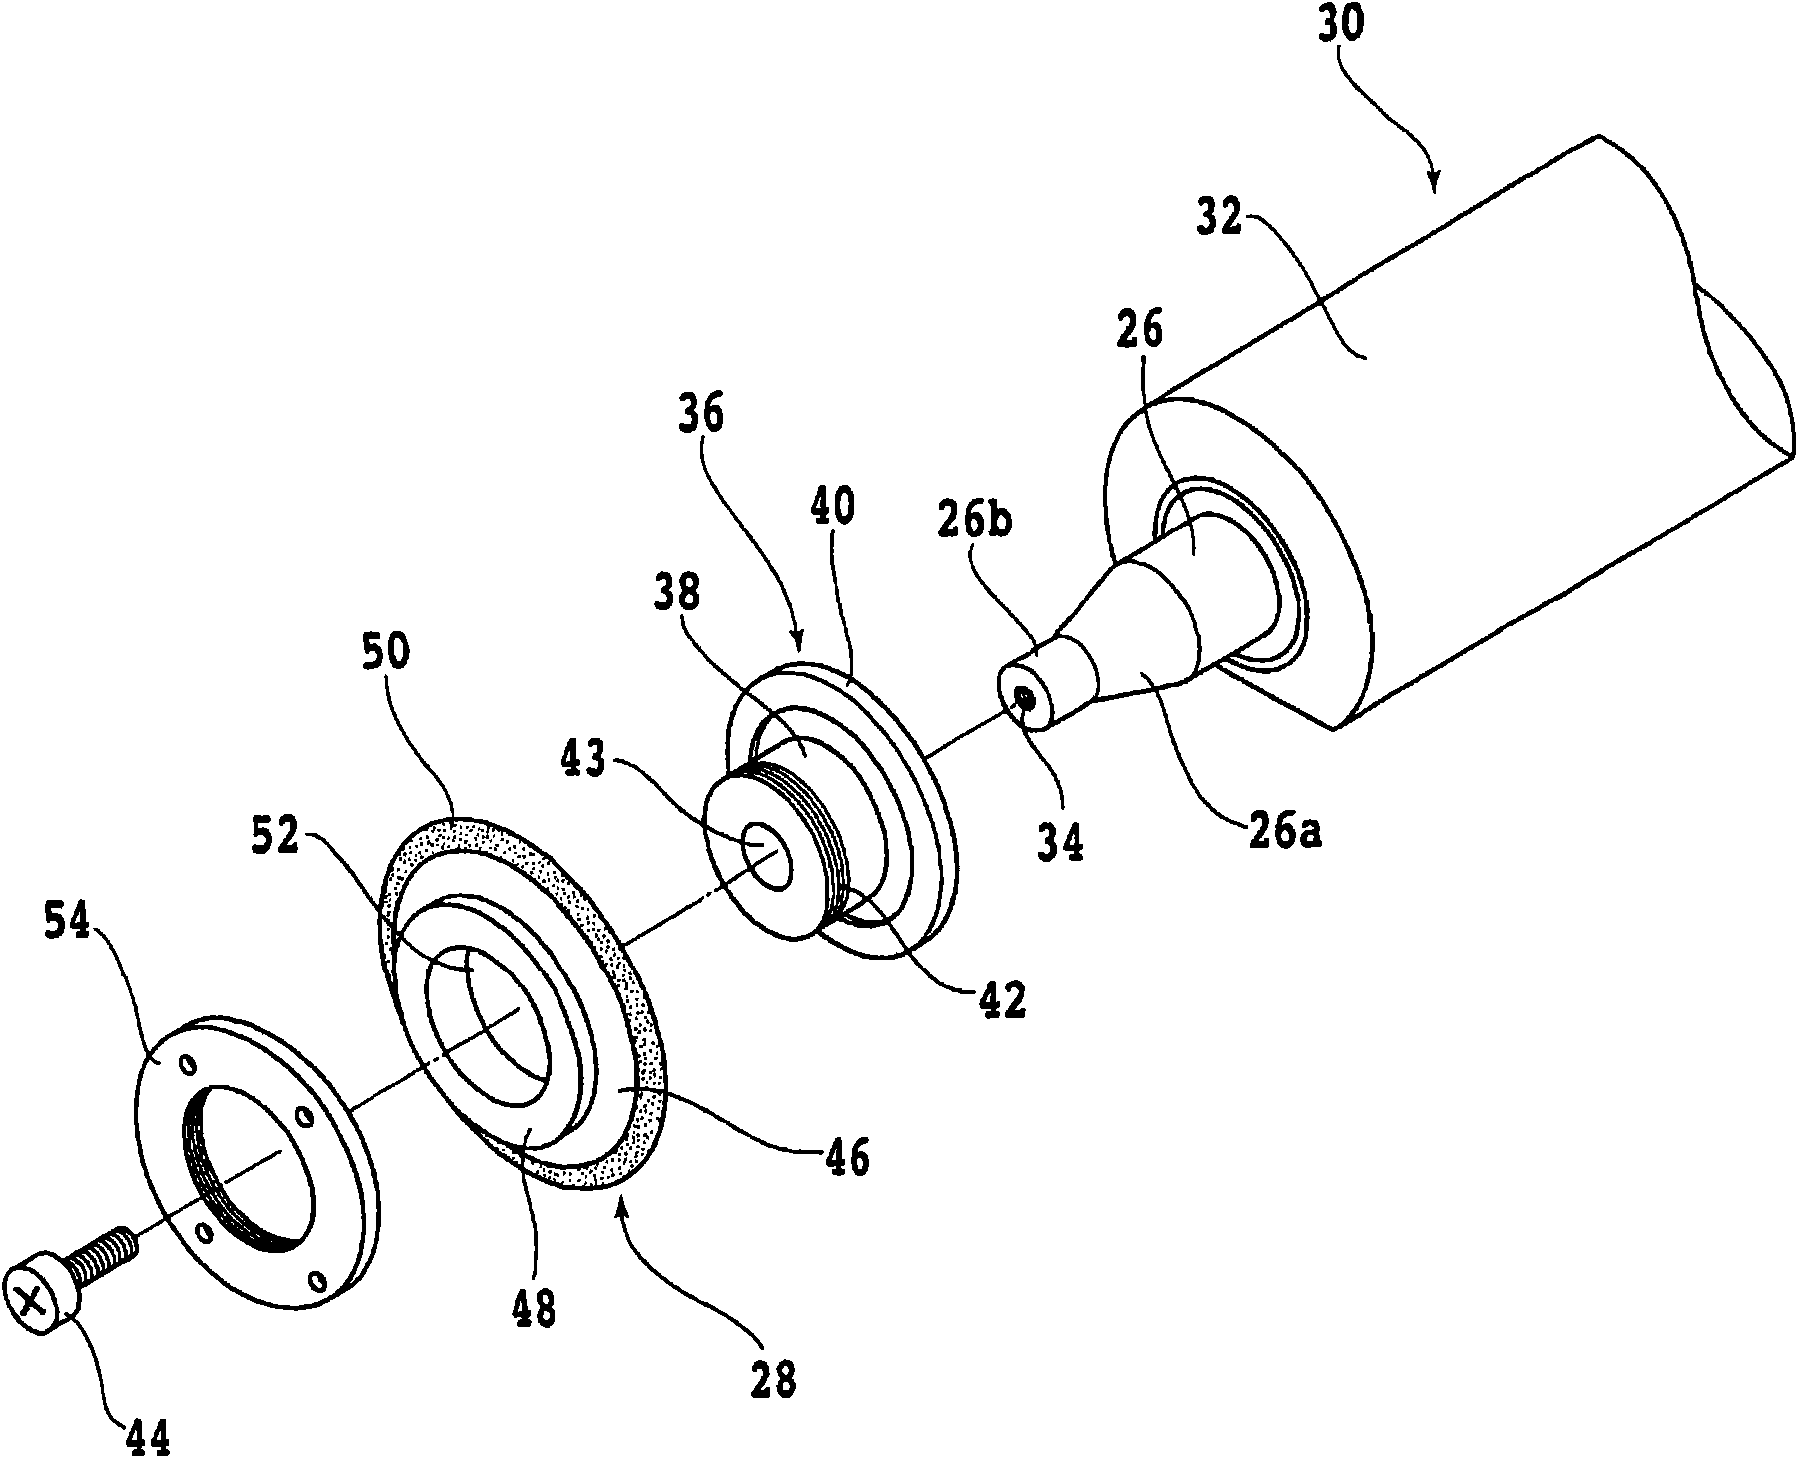 Support flange disassembling tool and support flange disassembling method